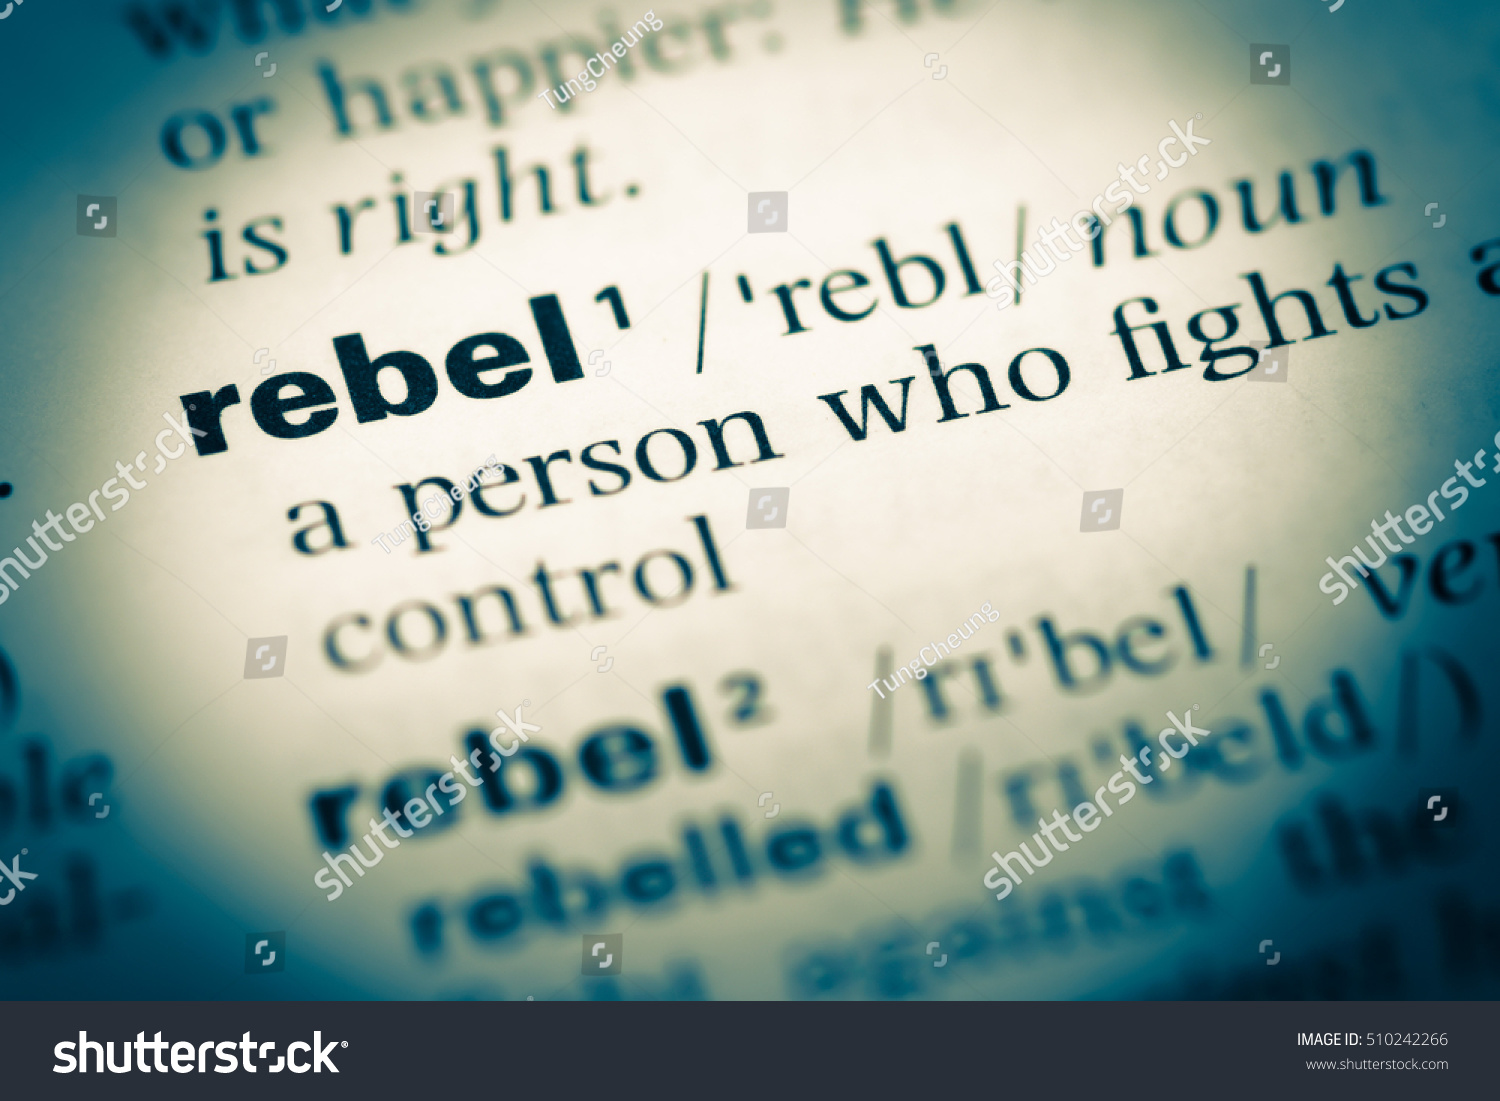 Rebel meaning